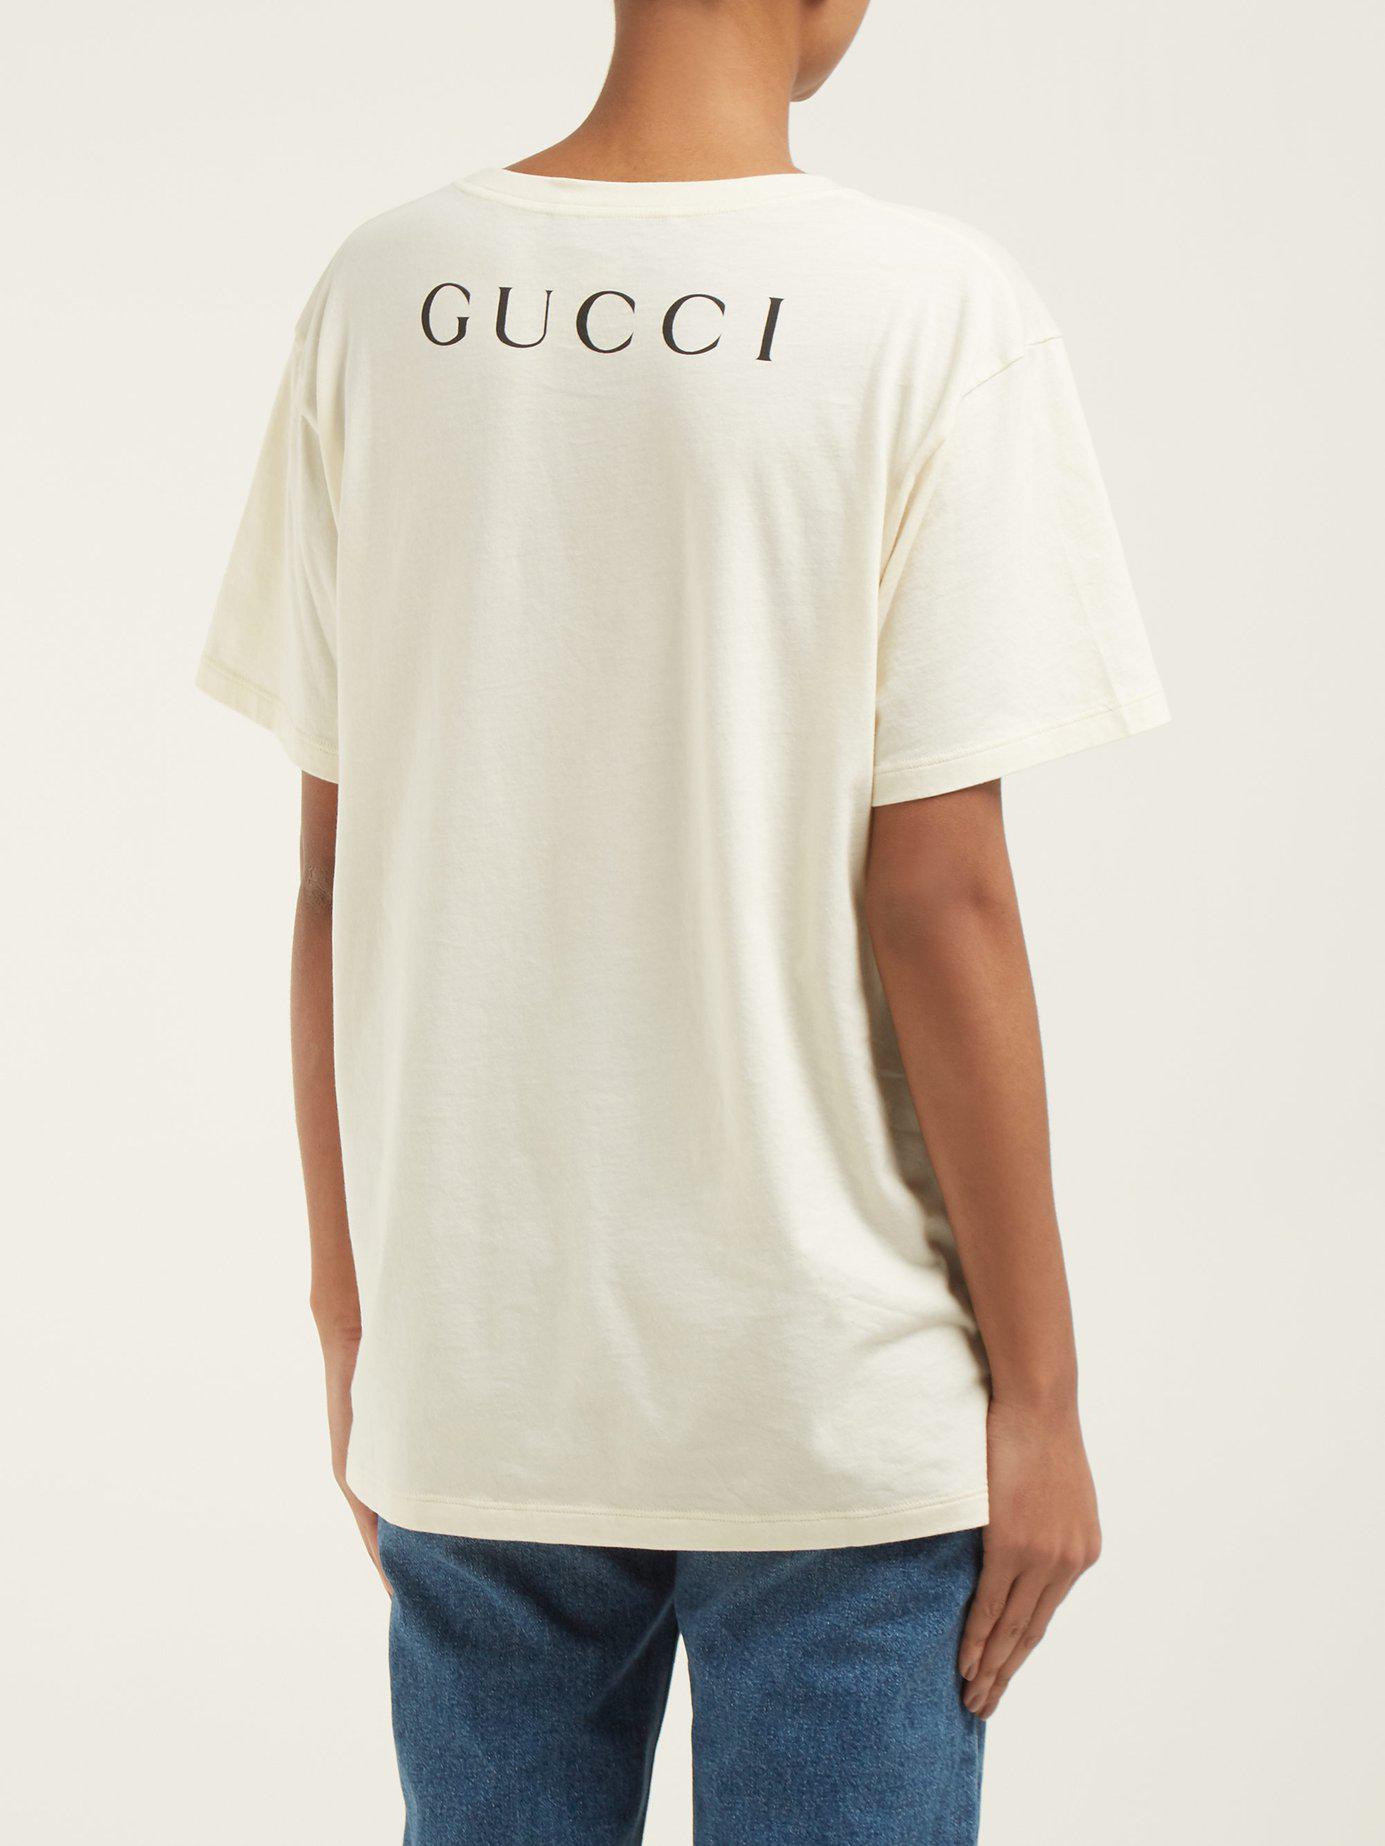 Gucci Billy Idol Printed Cotton T Shirt in White | Lyst